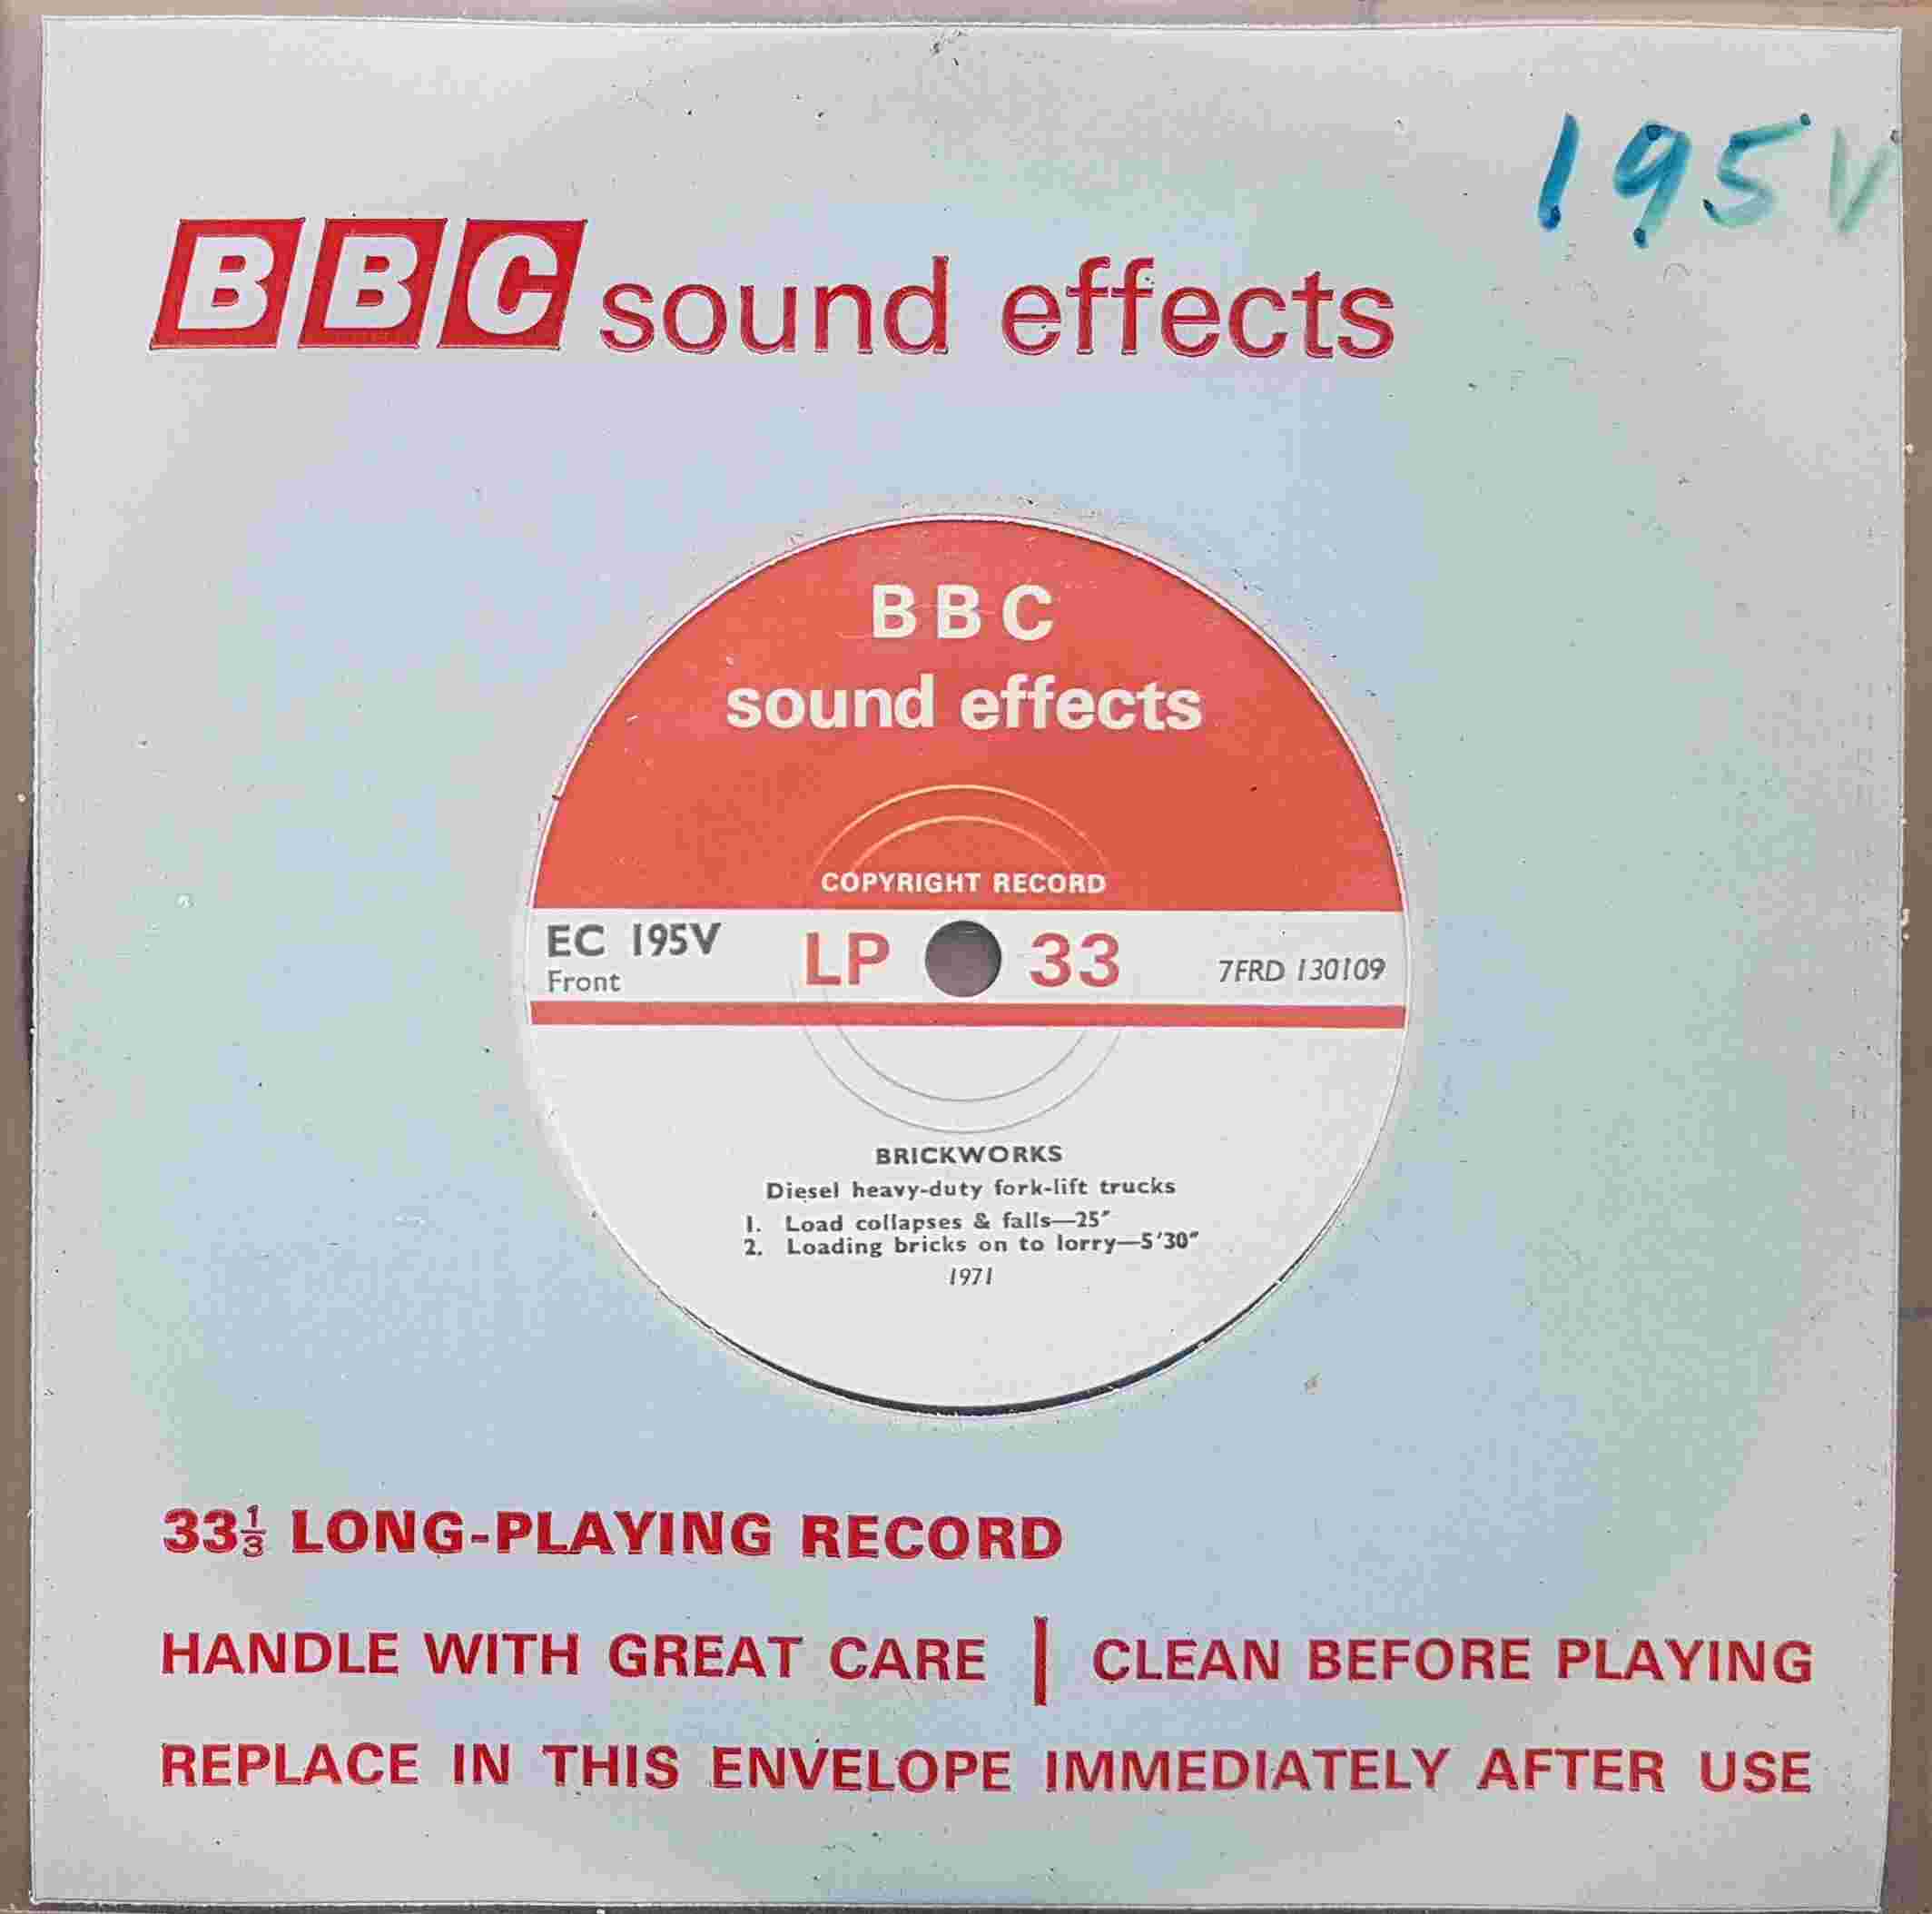 Picture of EC 195V Brickworks by artist Not registered from the BBC records and Tapes library